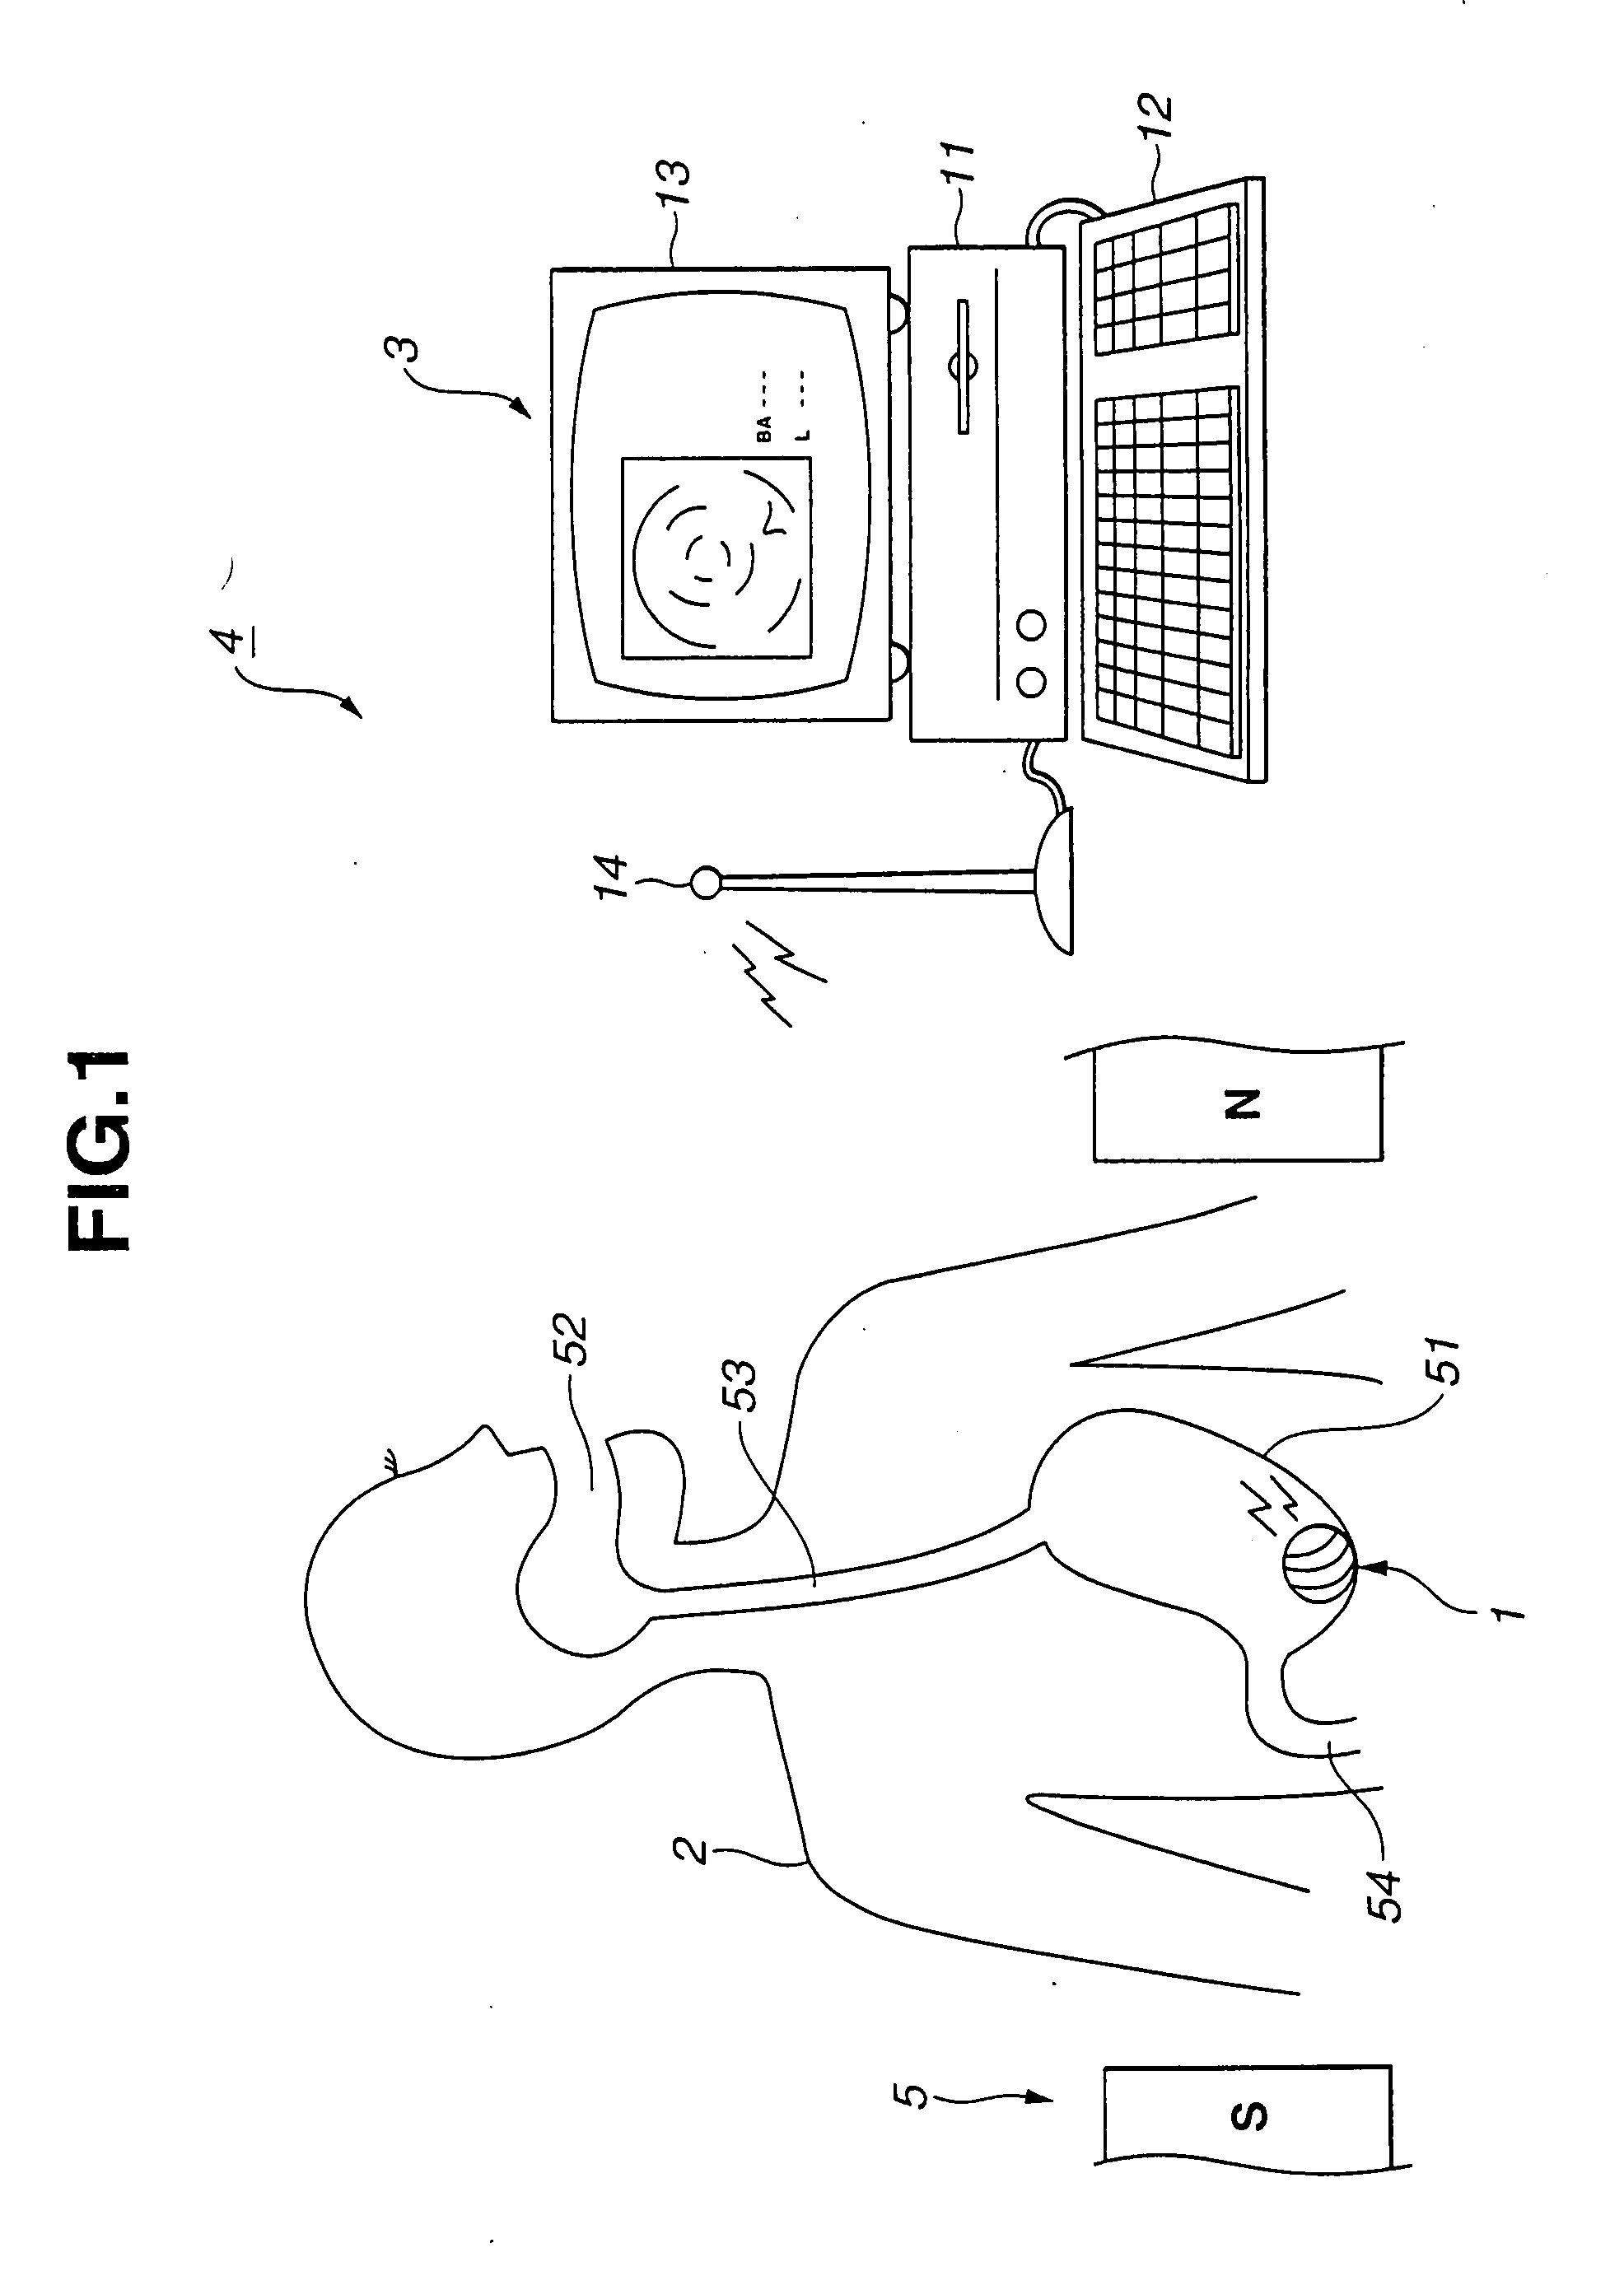 Capsule-type medical device